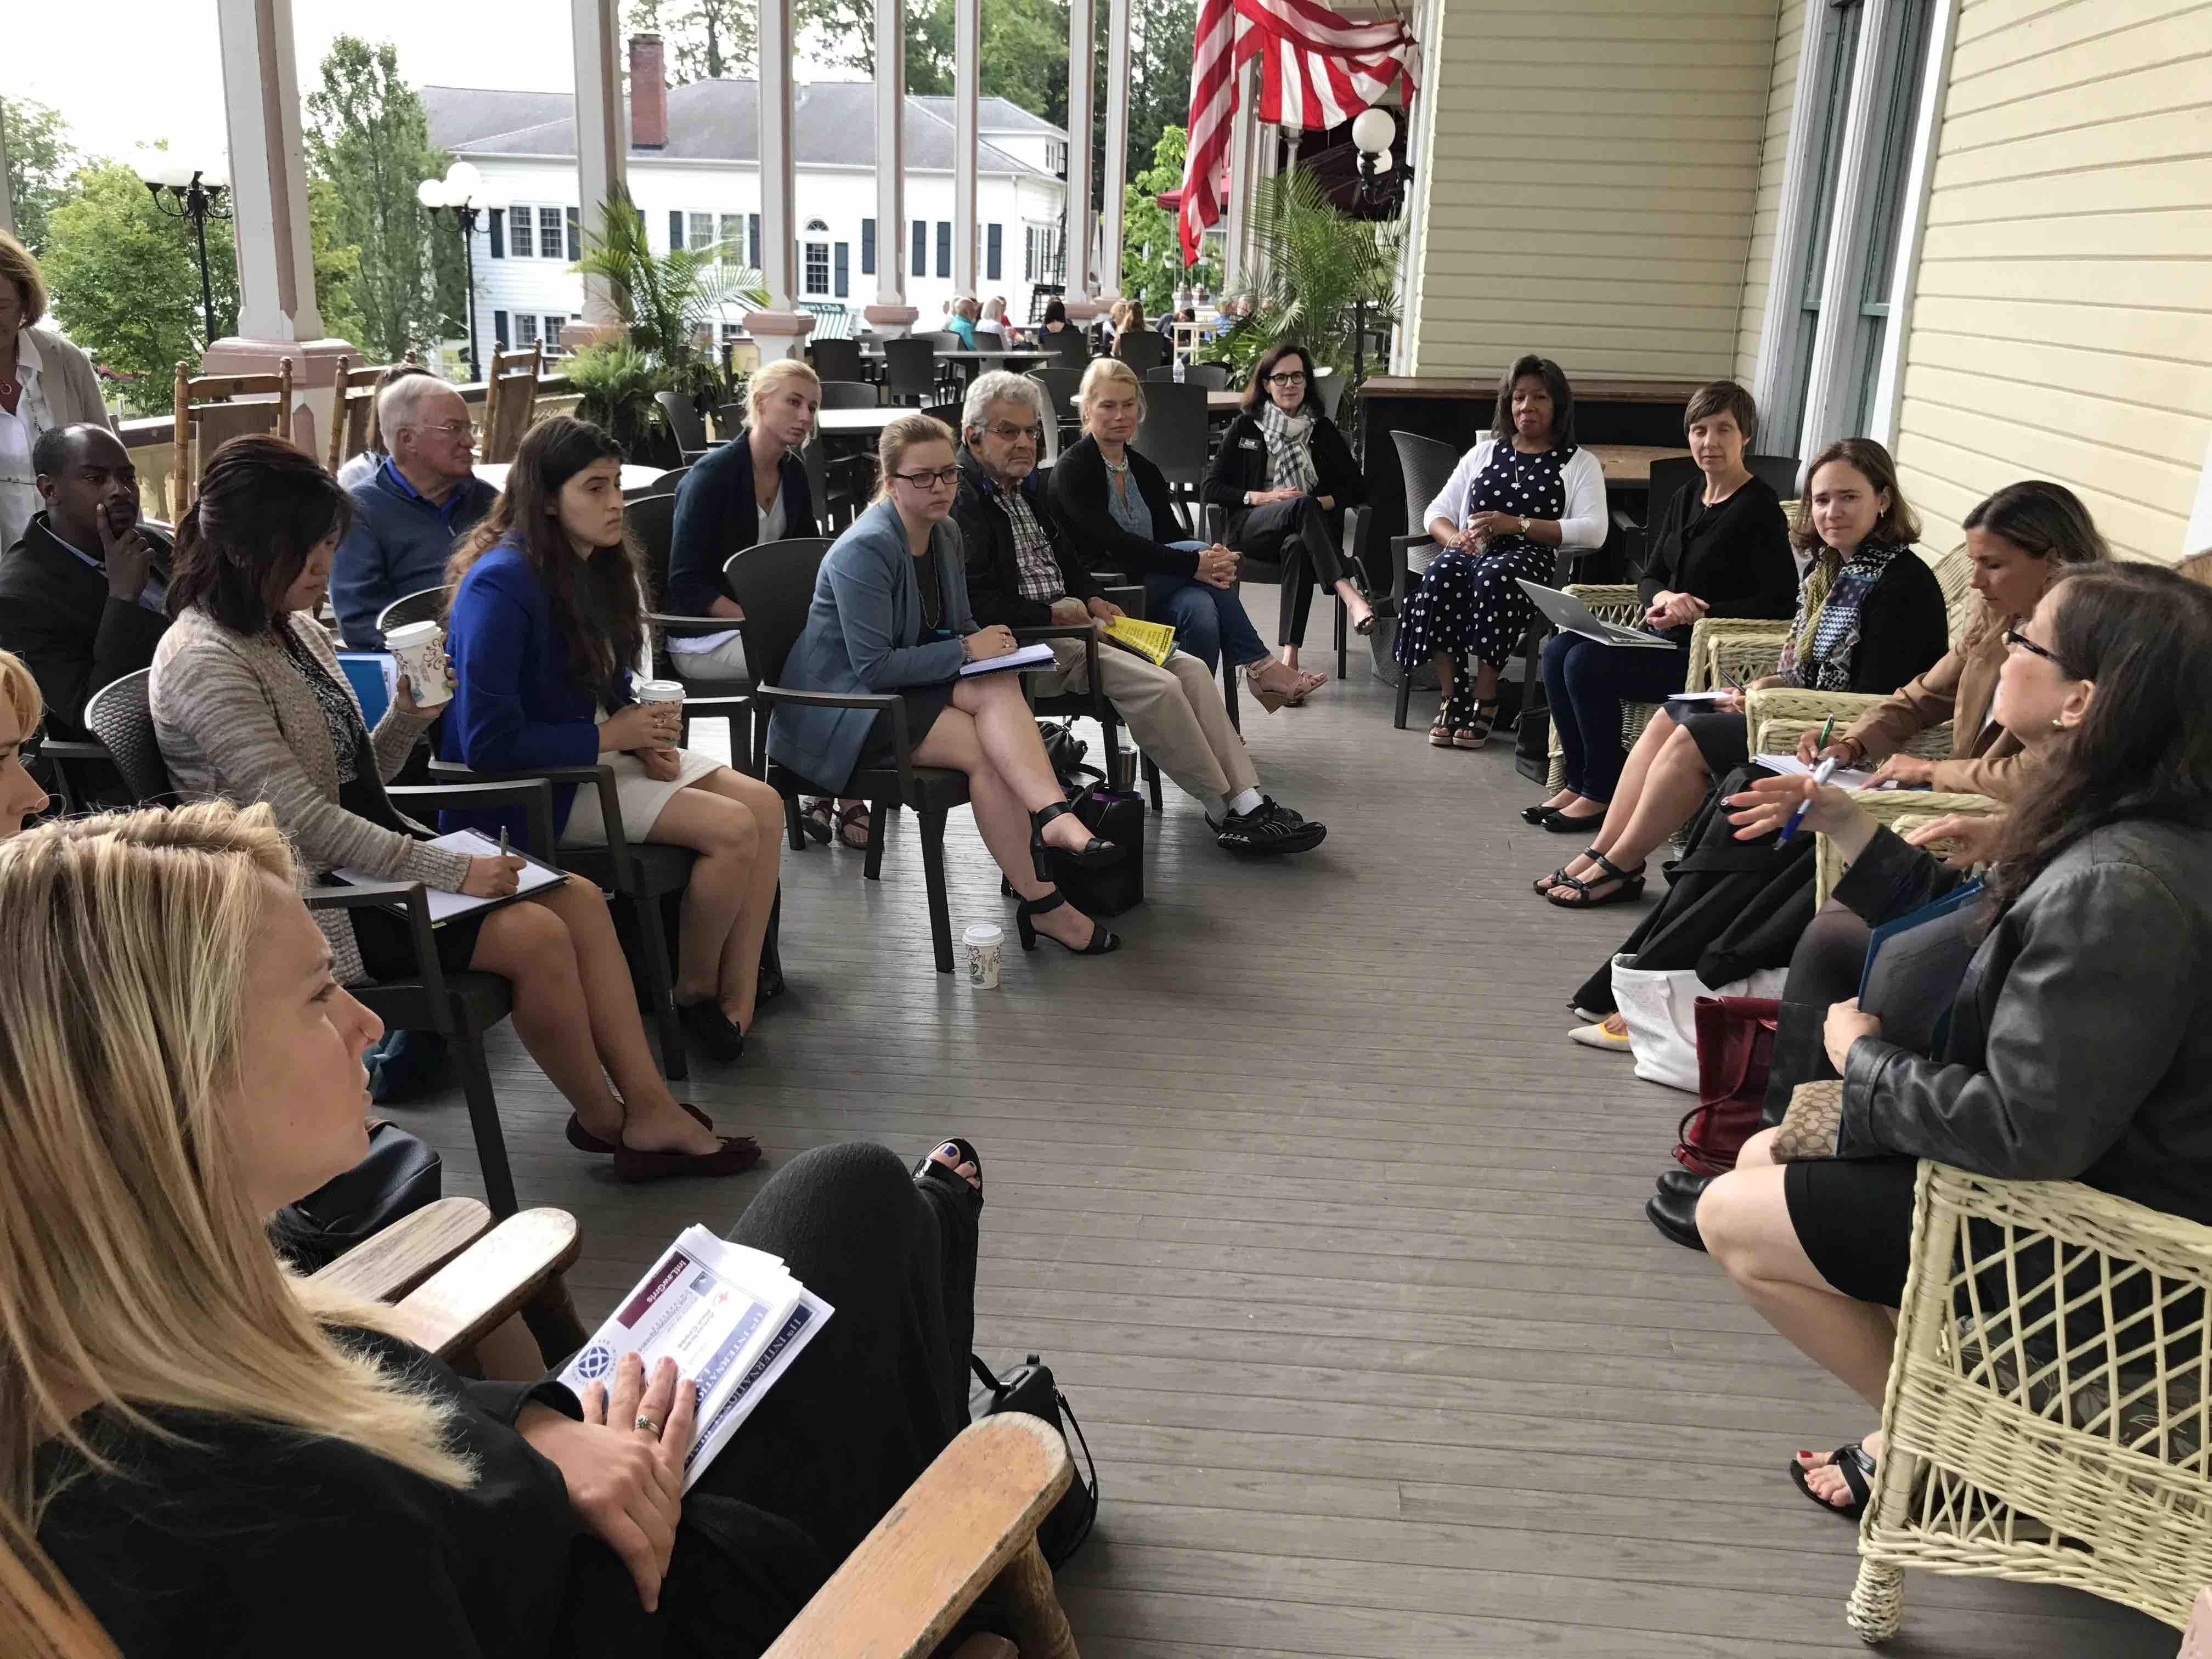 Chautauqua roundtable event in 2023, attendees gather on a porch to listen to panelists discuss 